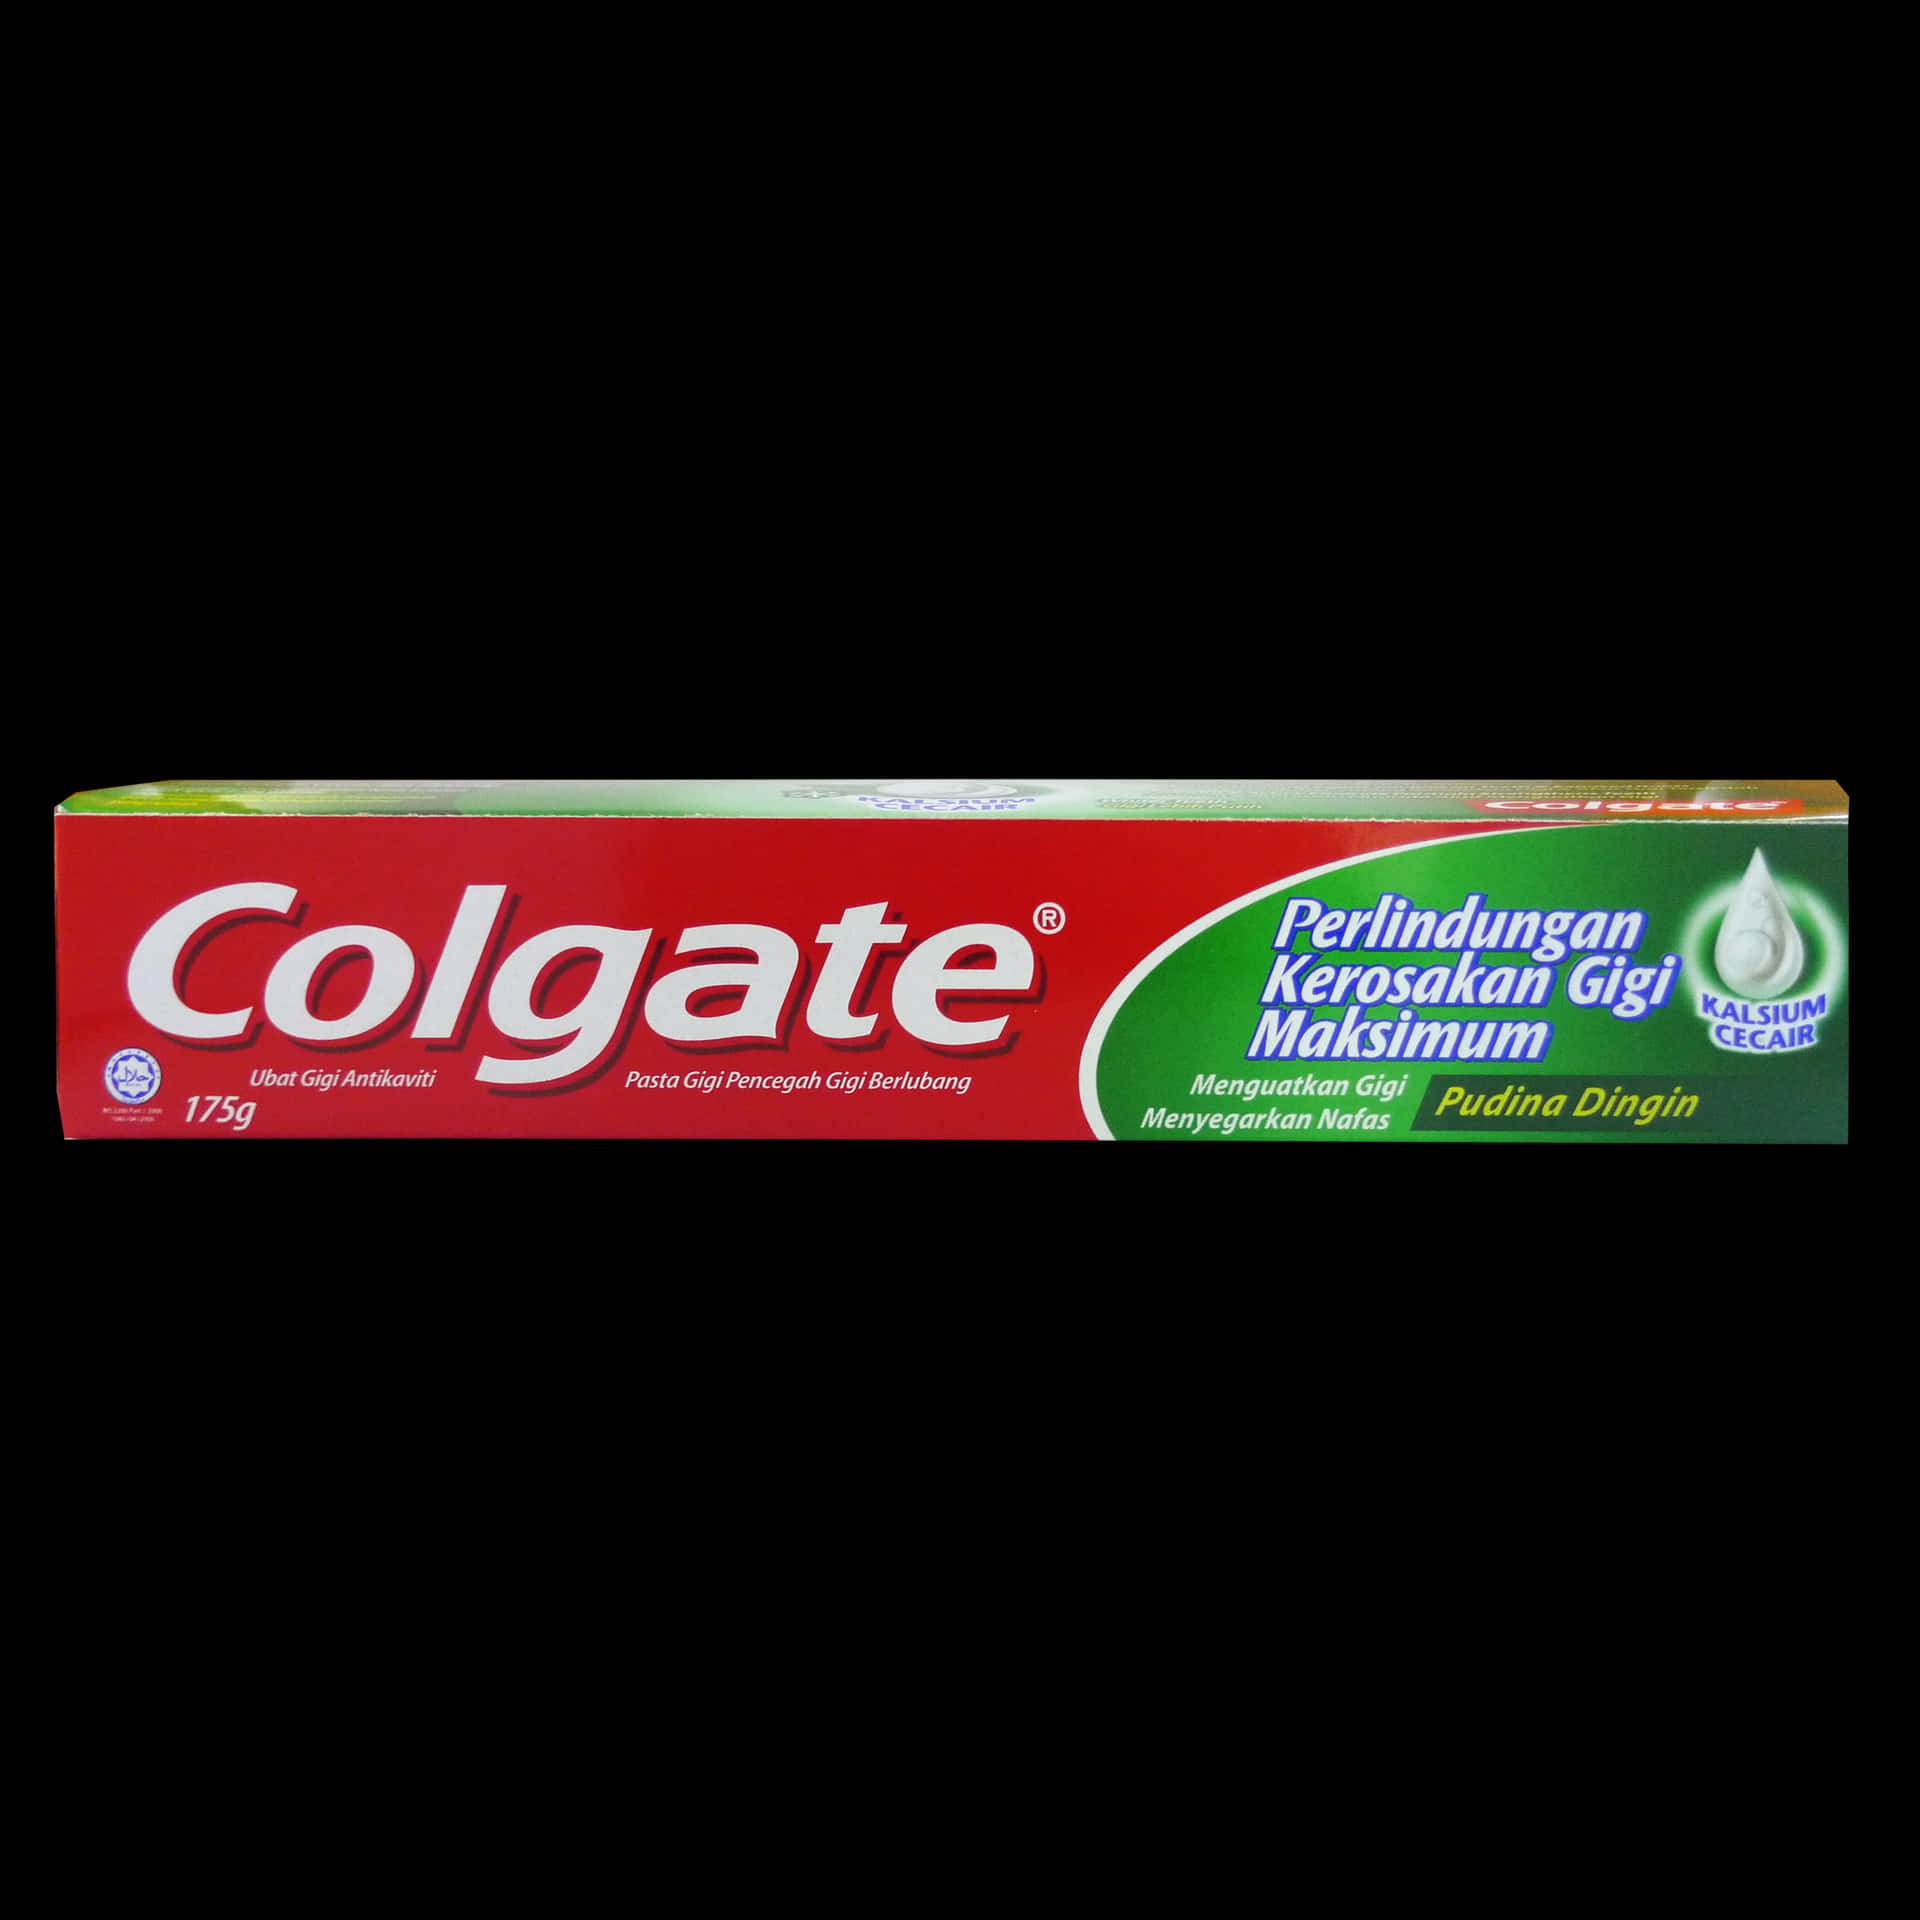 Colgate Toothpaste Box175g PNG